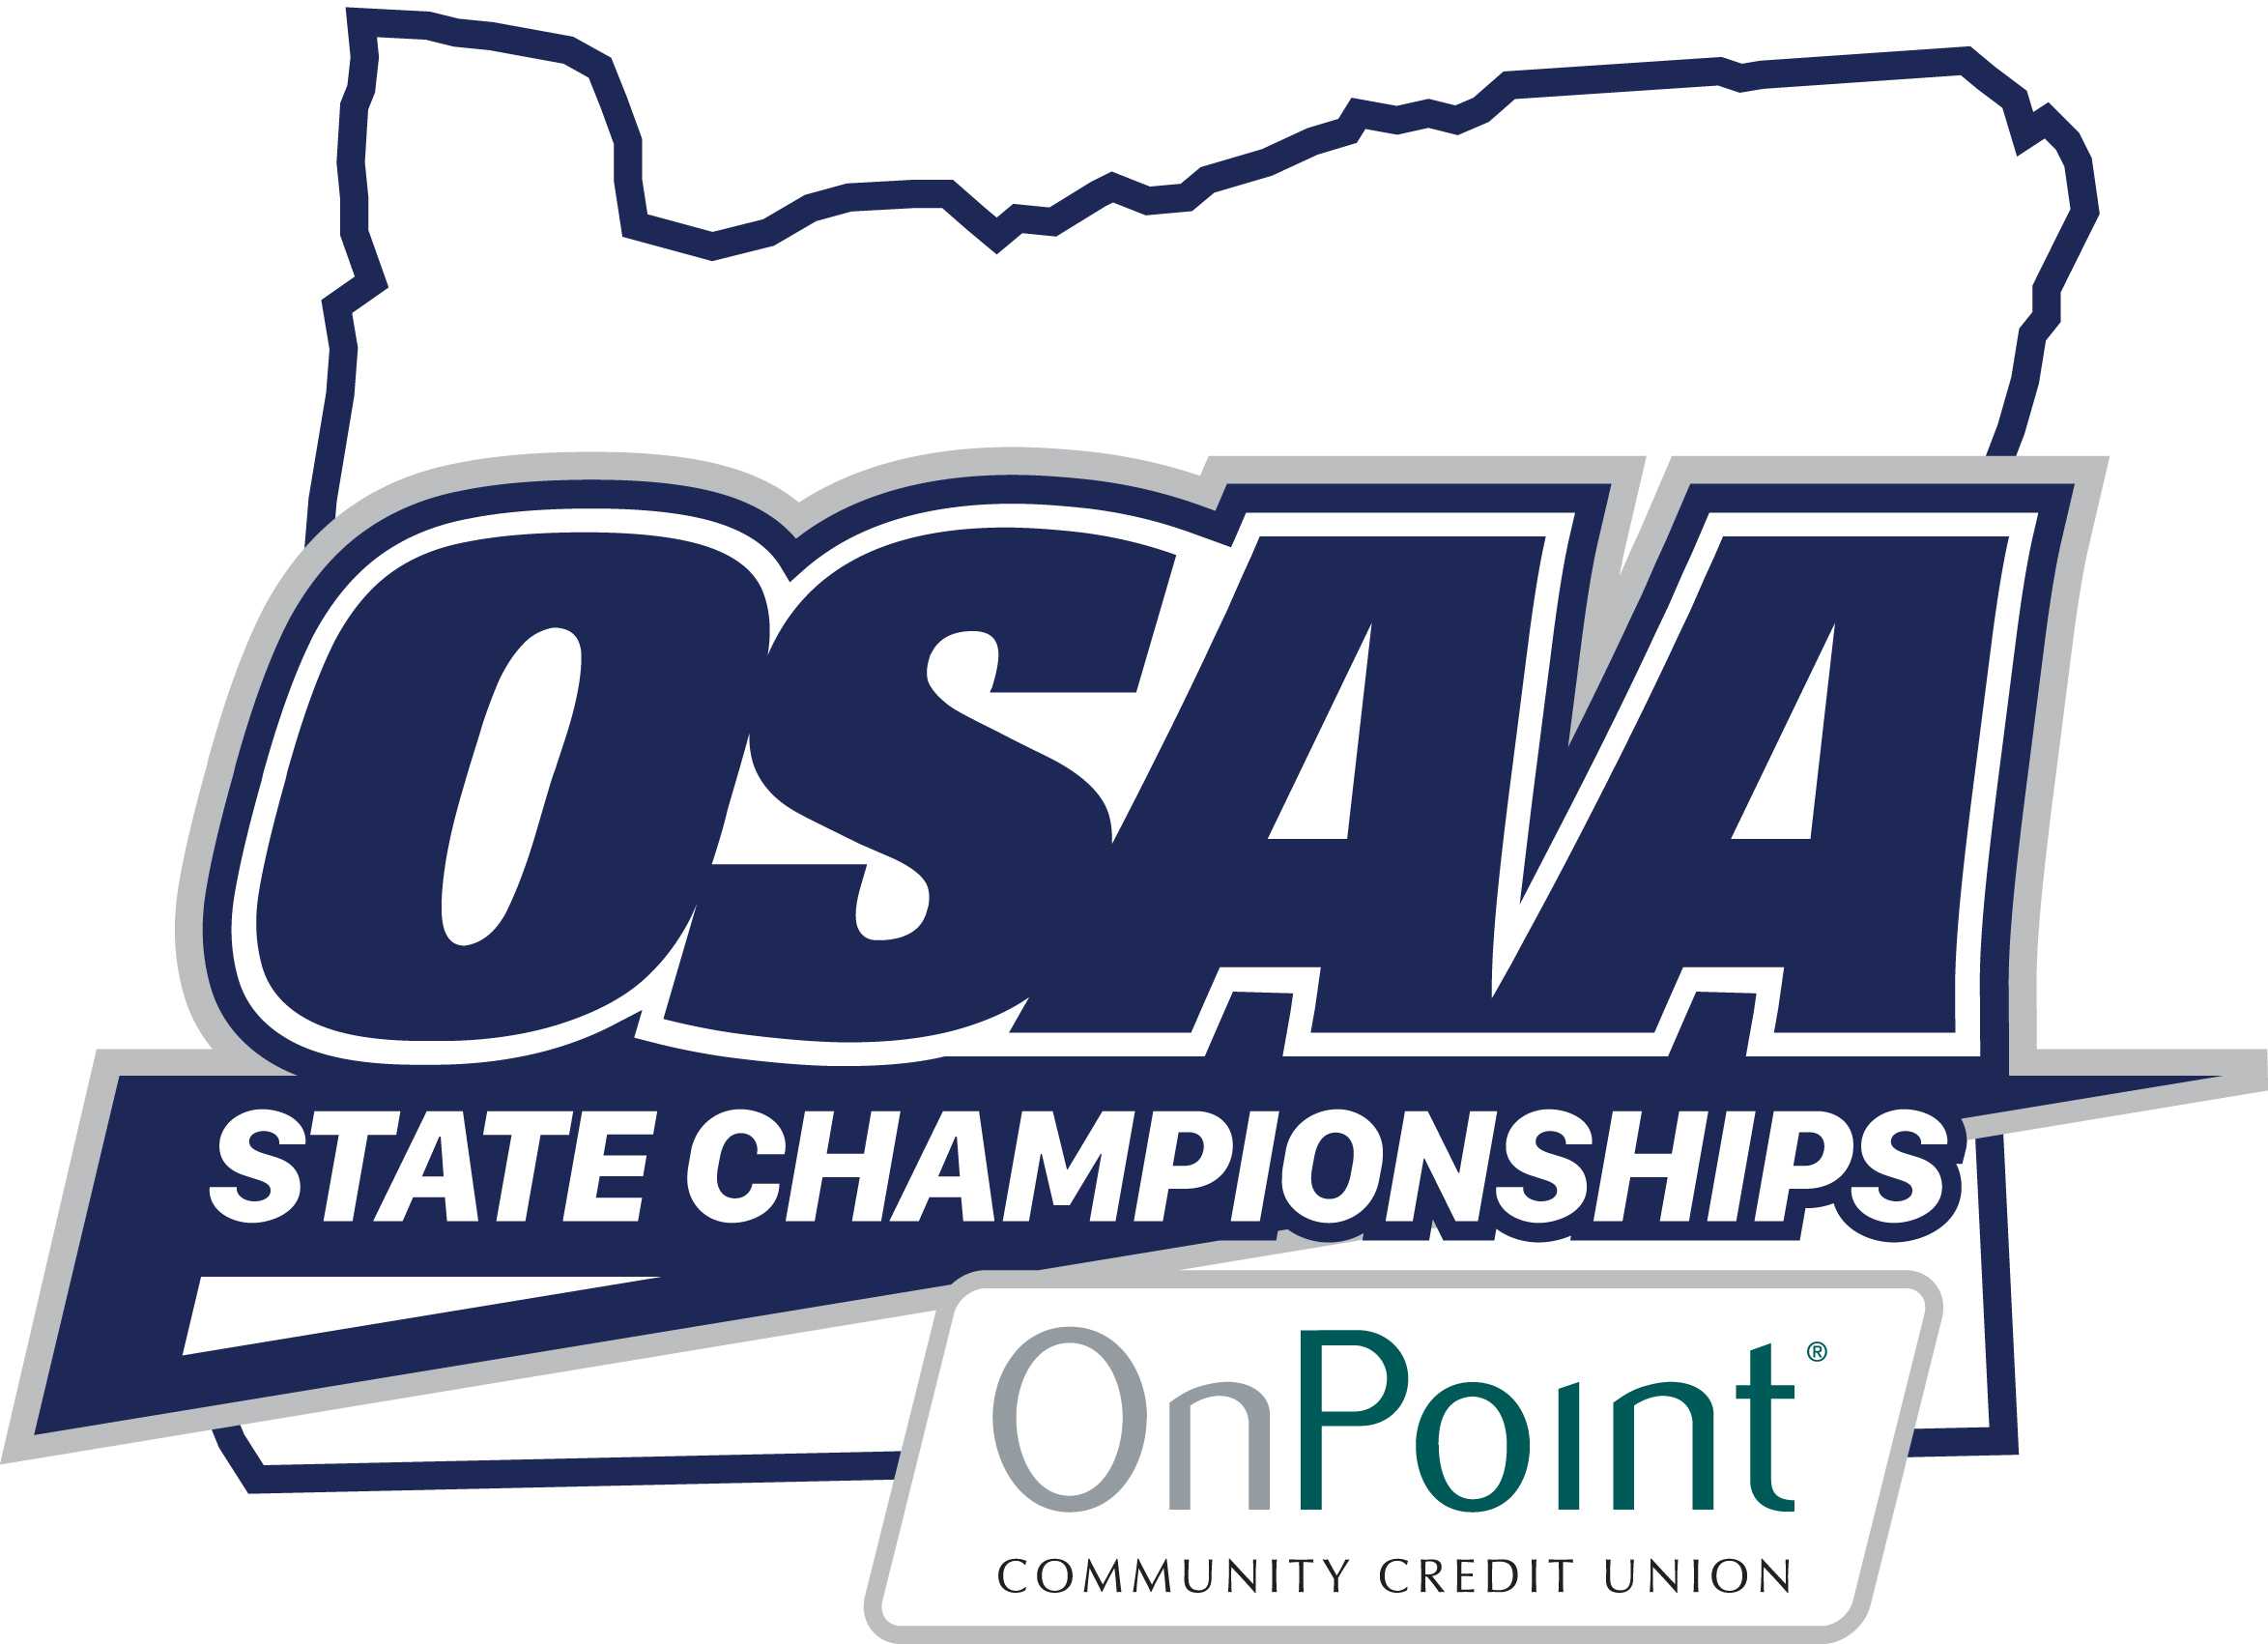 This new logo will be used to brand OSAA State Championships and the OSAA's partnership with OnPoint Community Credit Union.